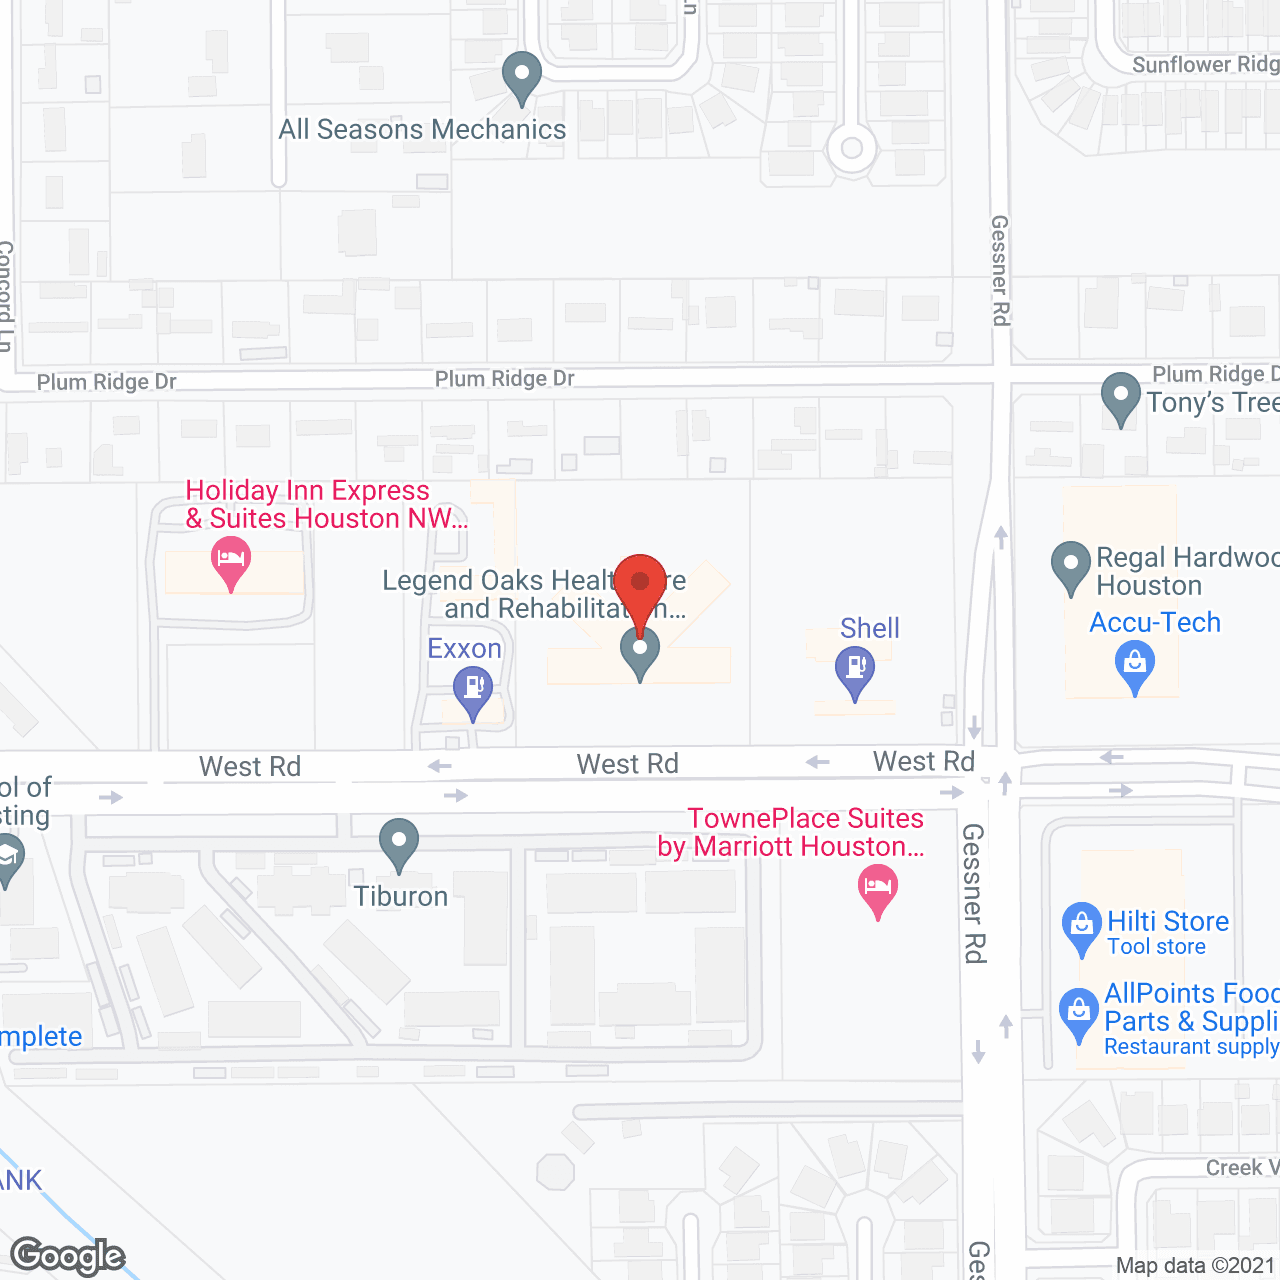 Legend Oaks Healthcare And Rehabilitation North Houston (Willowbrook) in google map